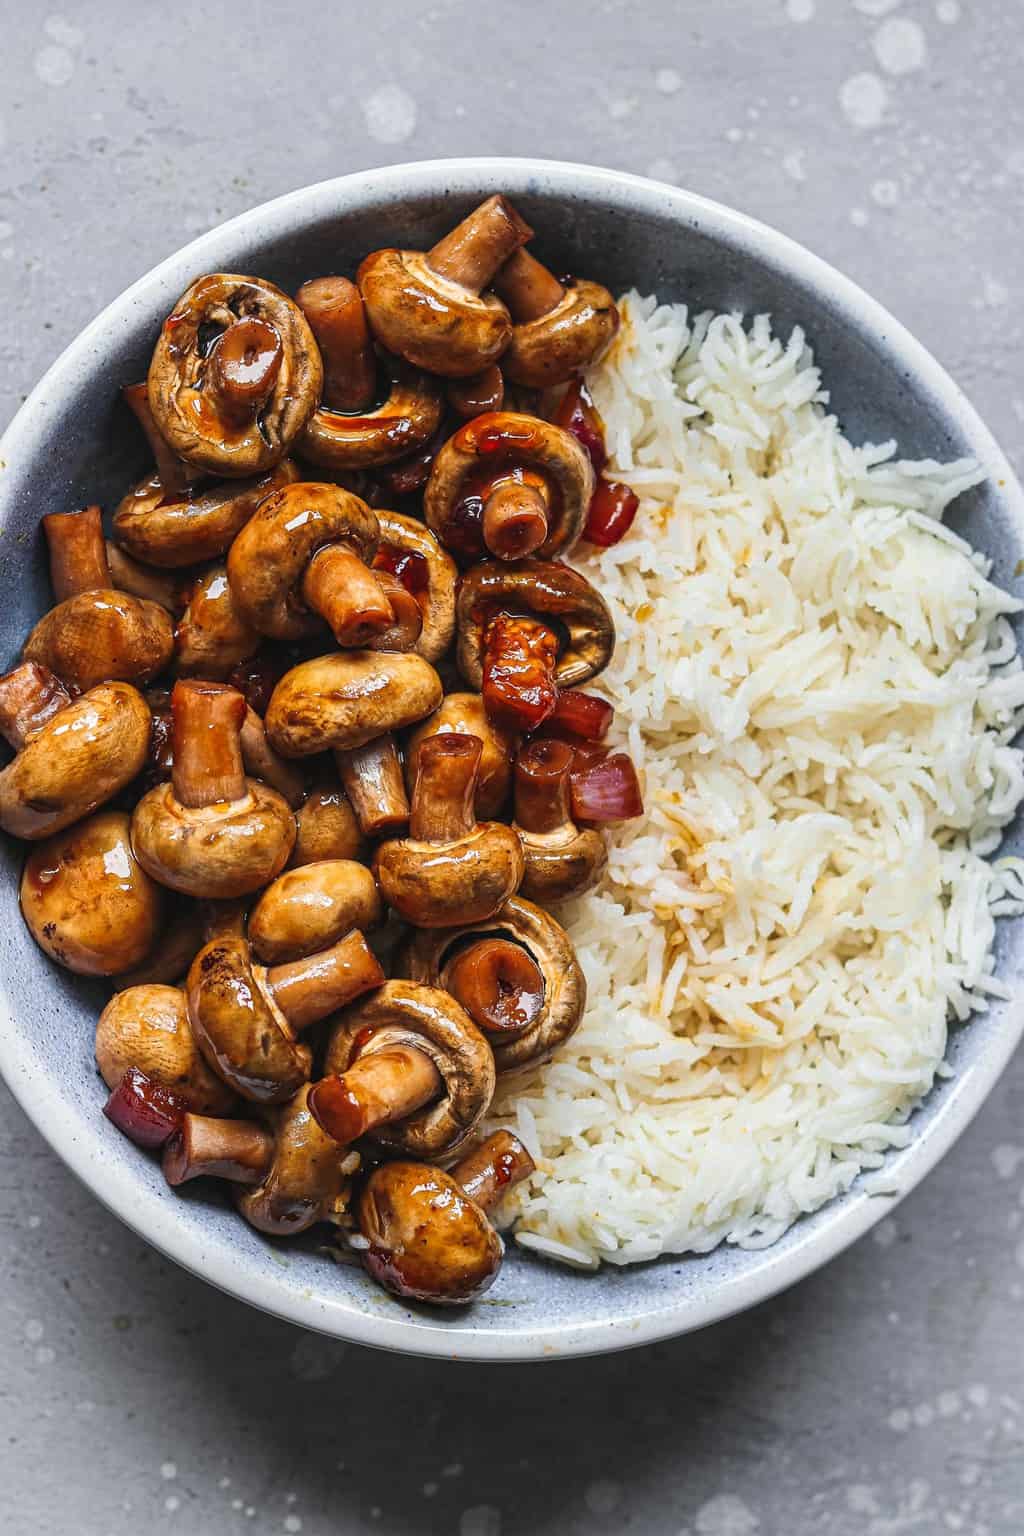 Mushrooms and rice in a blue bowl